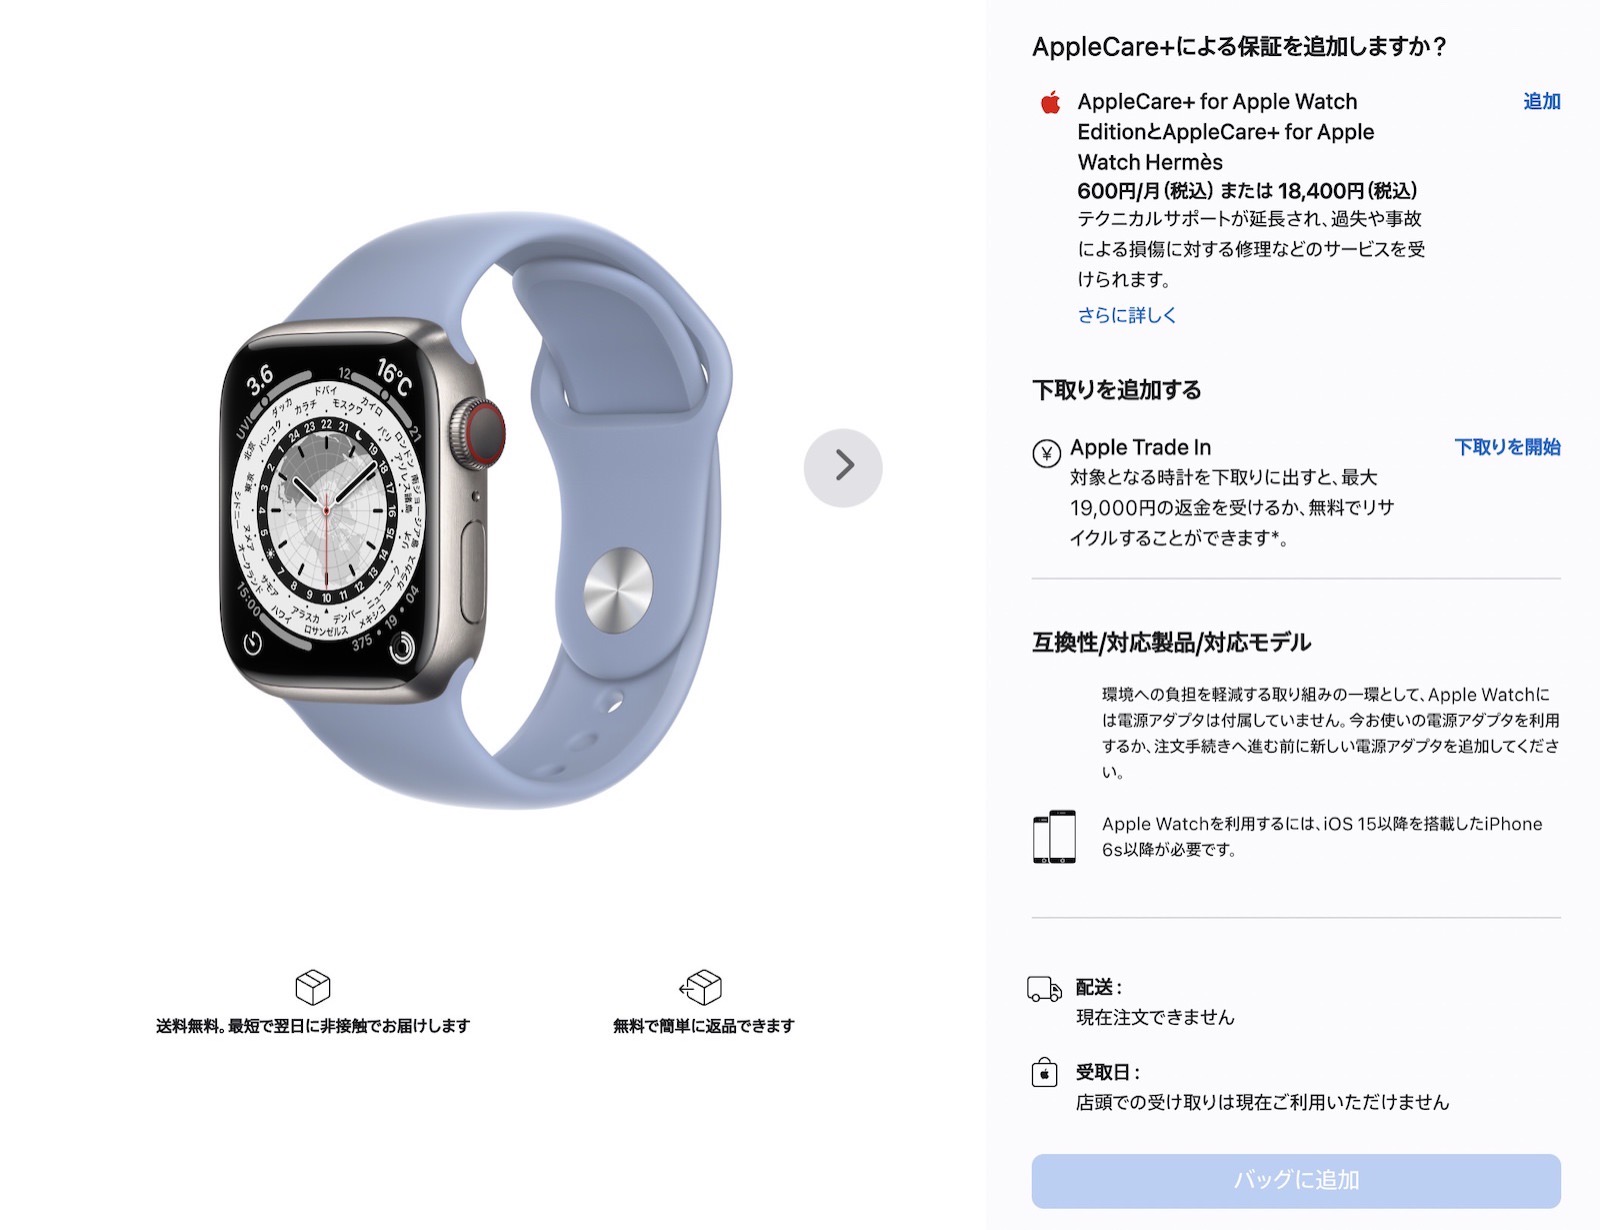 Apple Watch Edition out of stock